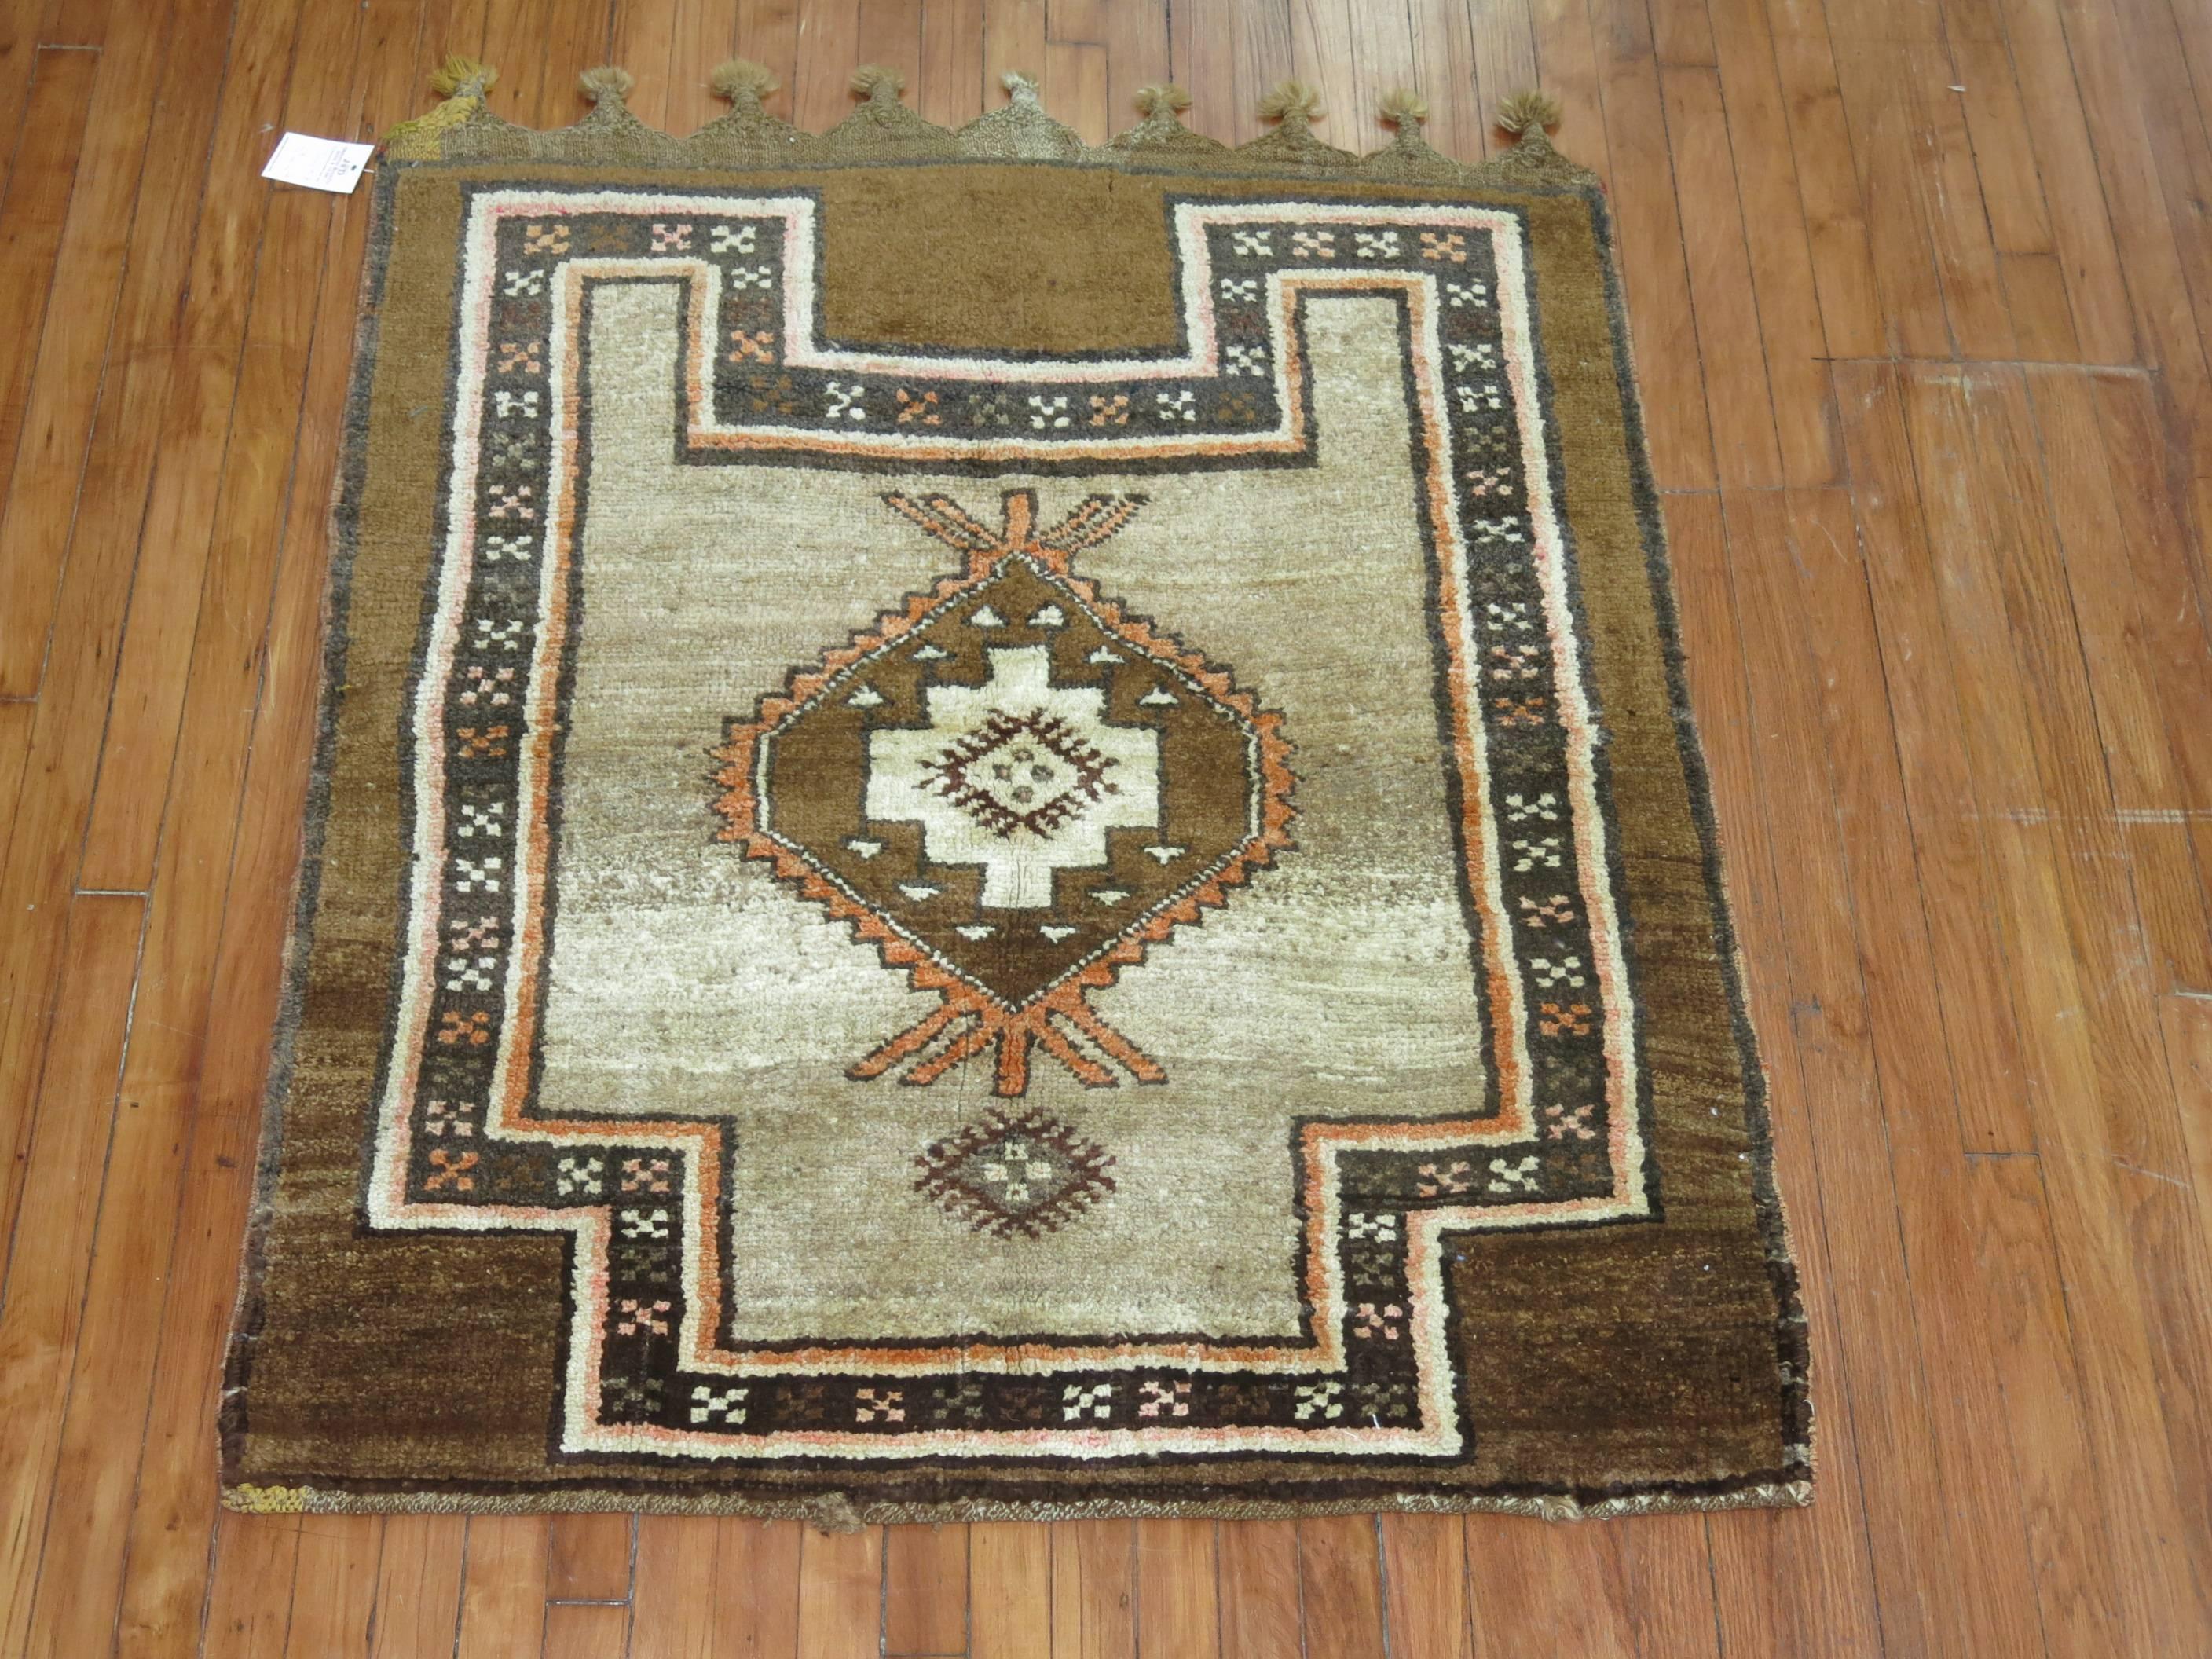 Vintage Turkish tribal throw rug featuring thick fringes in one end,

circa mid-20th century, measures: 3'8